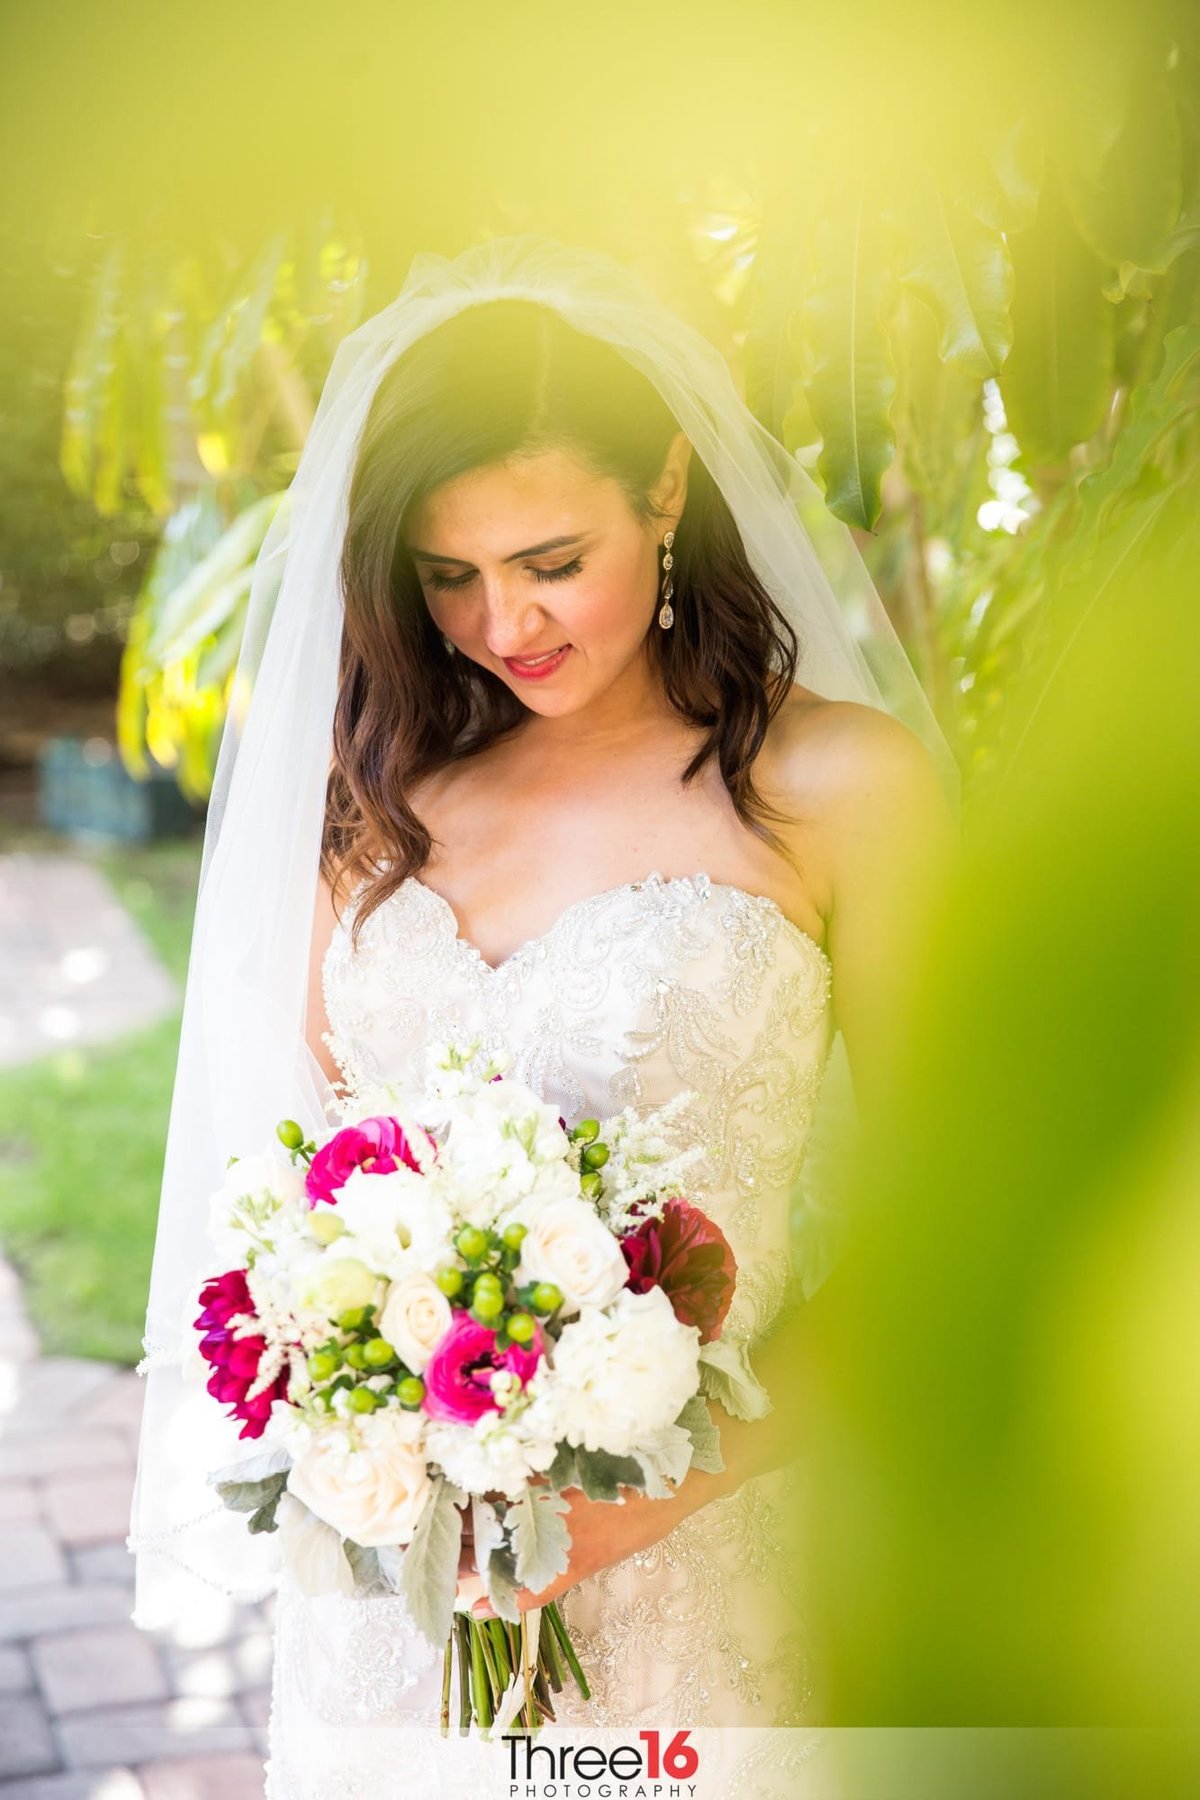 Bride takes a moment to reflect as she looks down at her bouquet